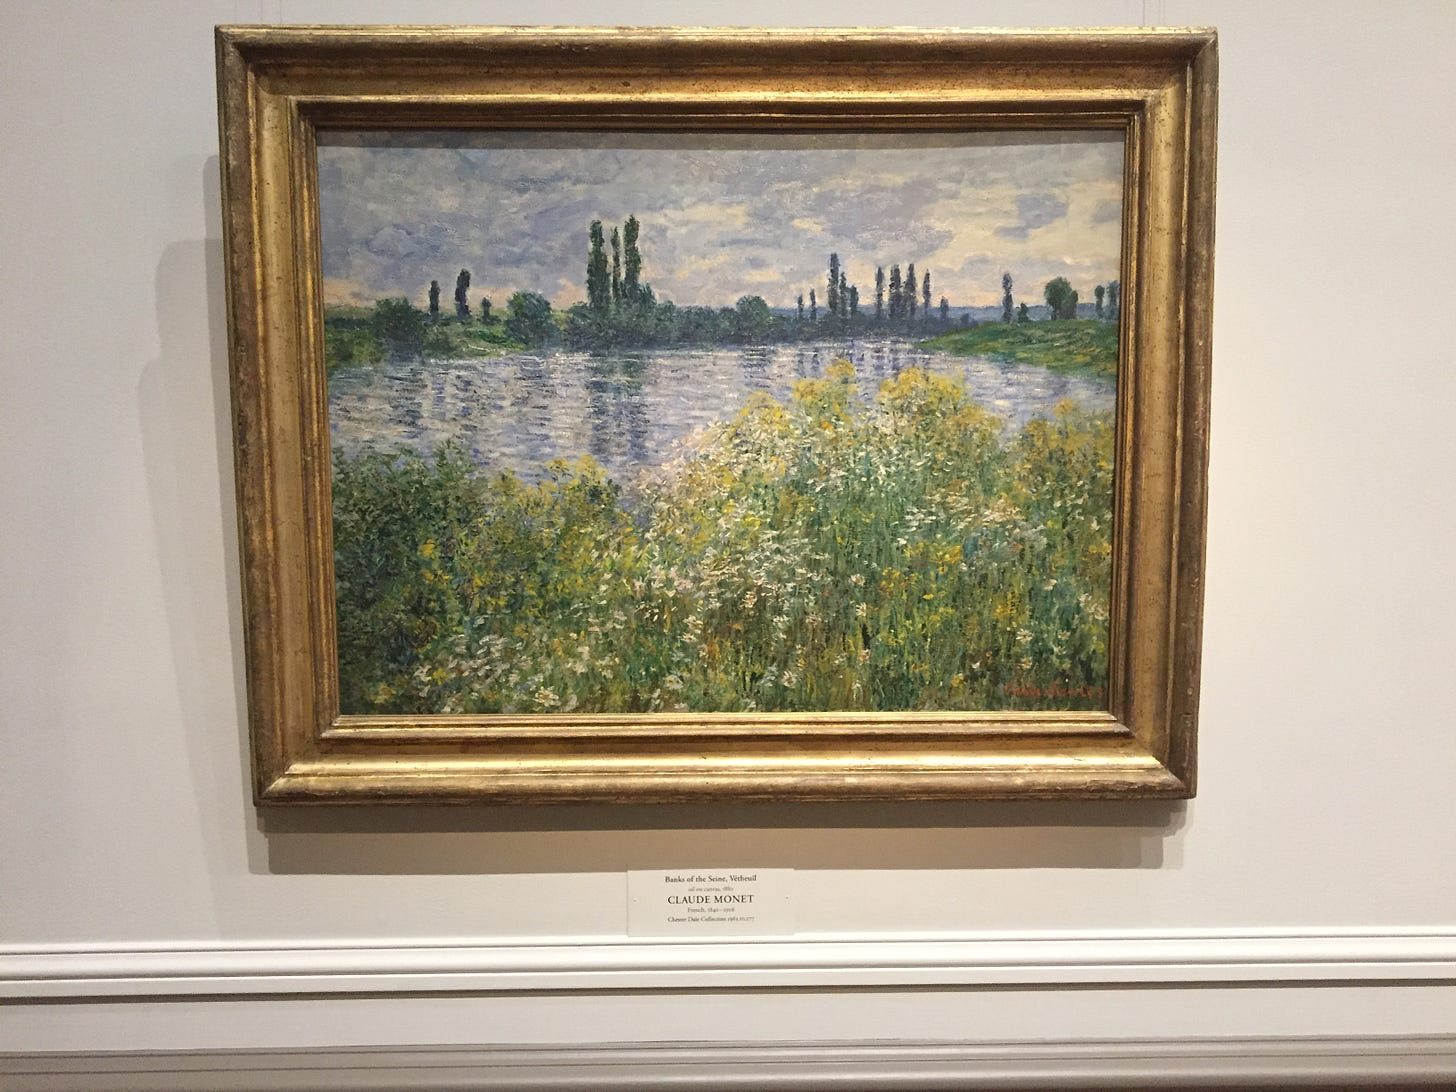 The infamous Monet painting, “Banks of the Seine, Vétheuil,” at the NGA.